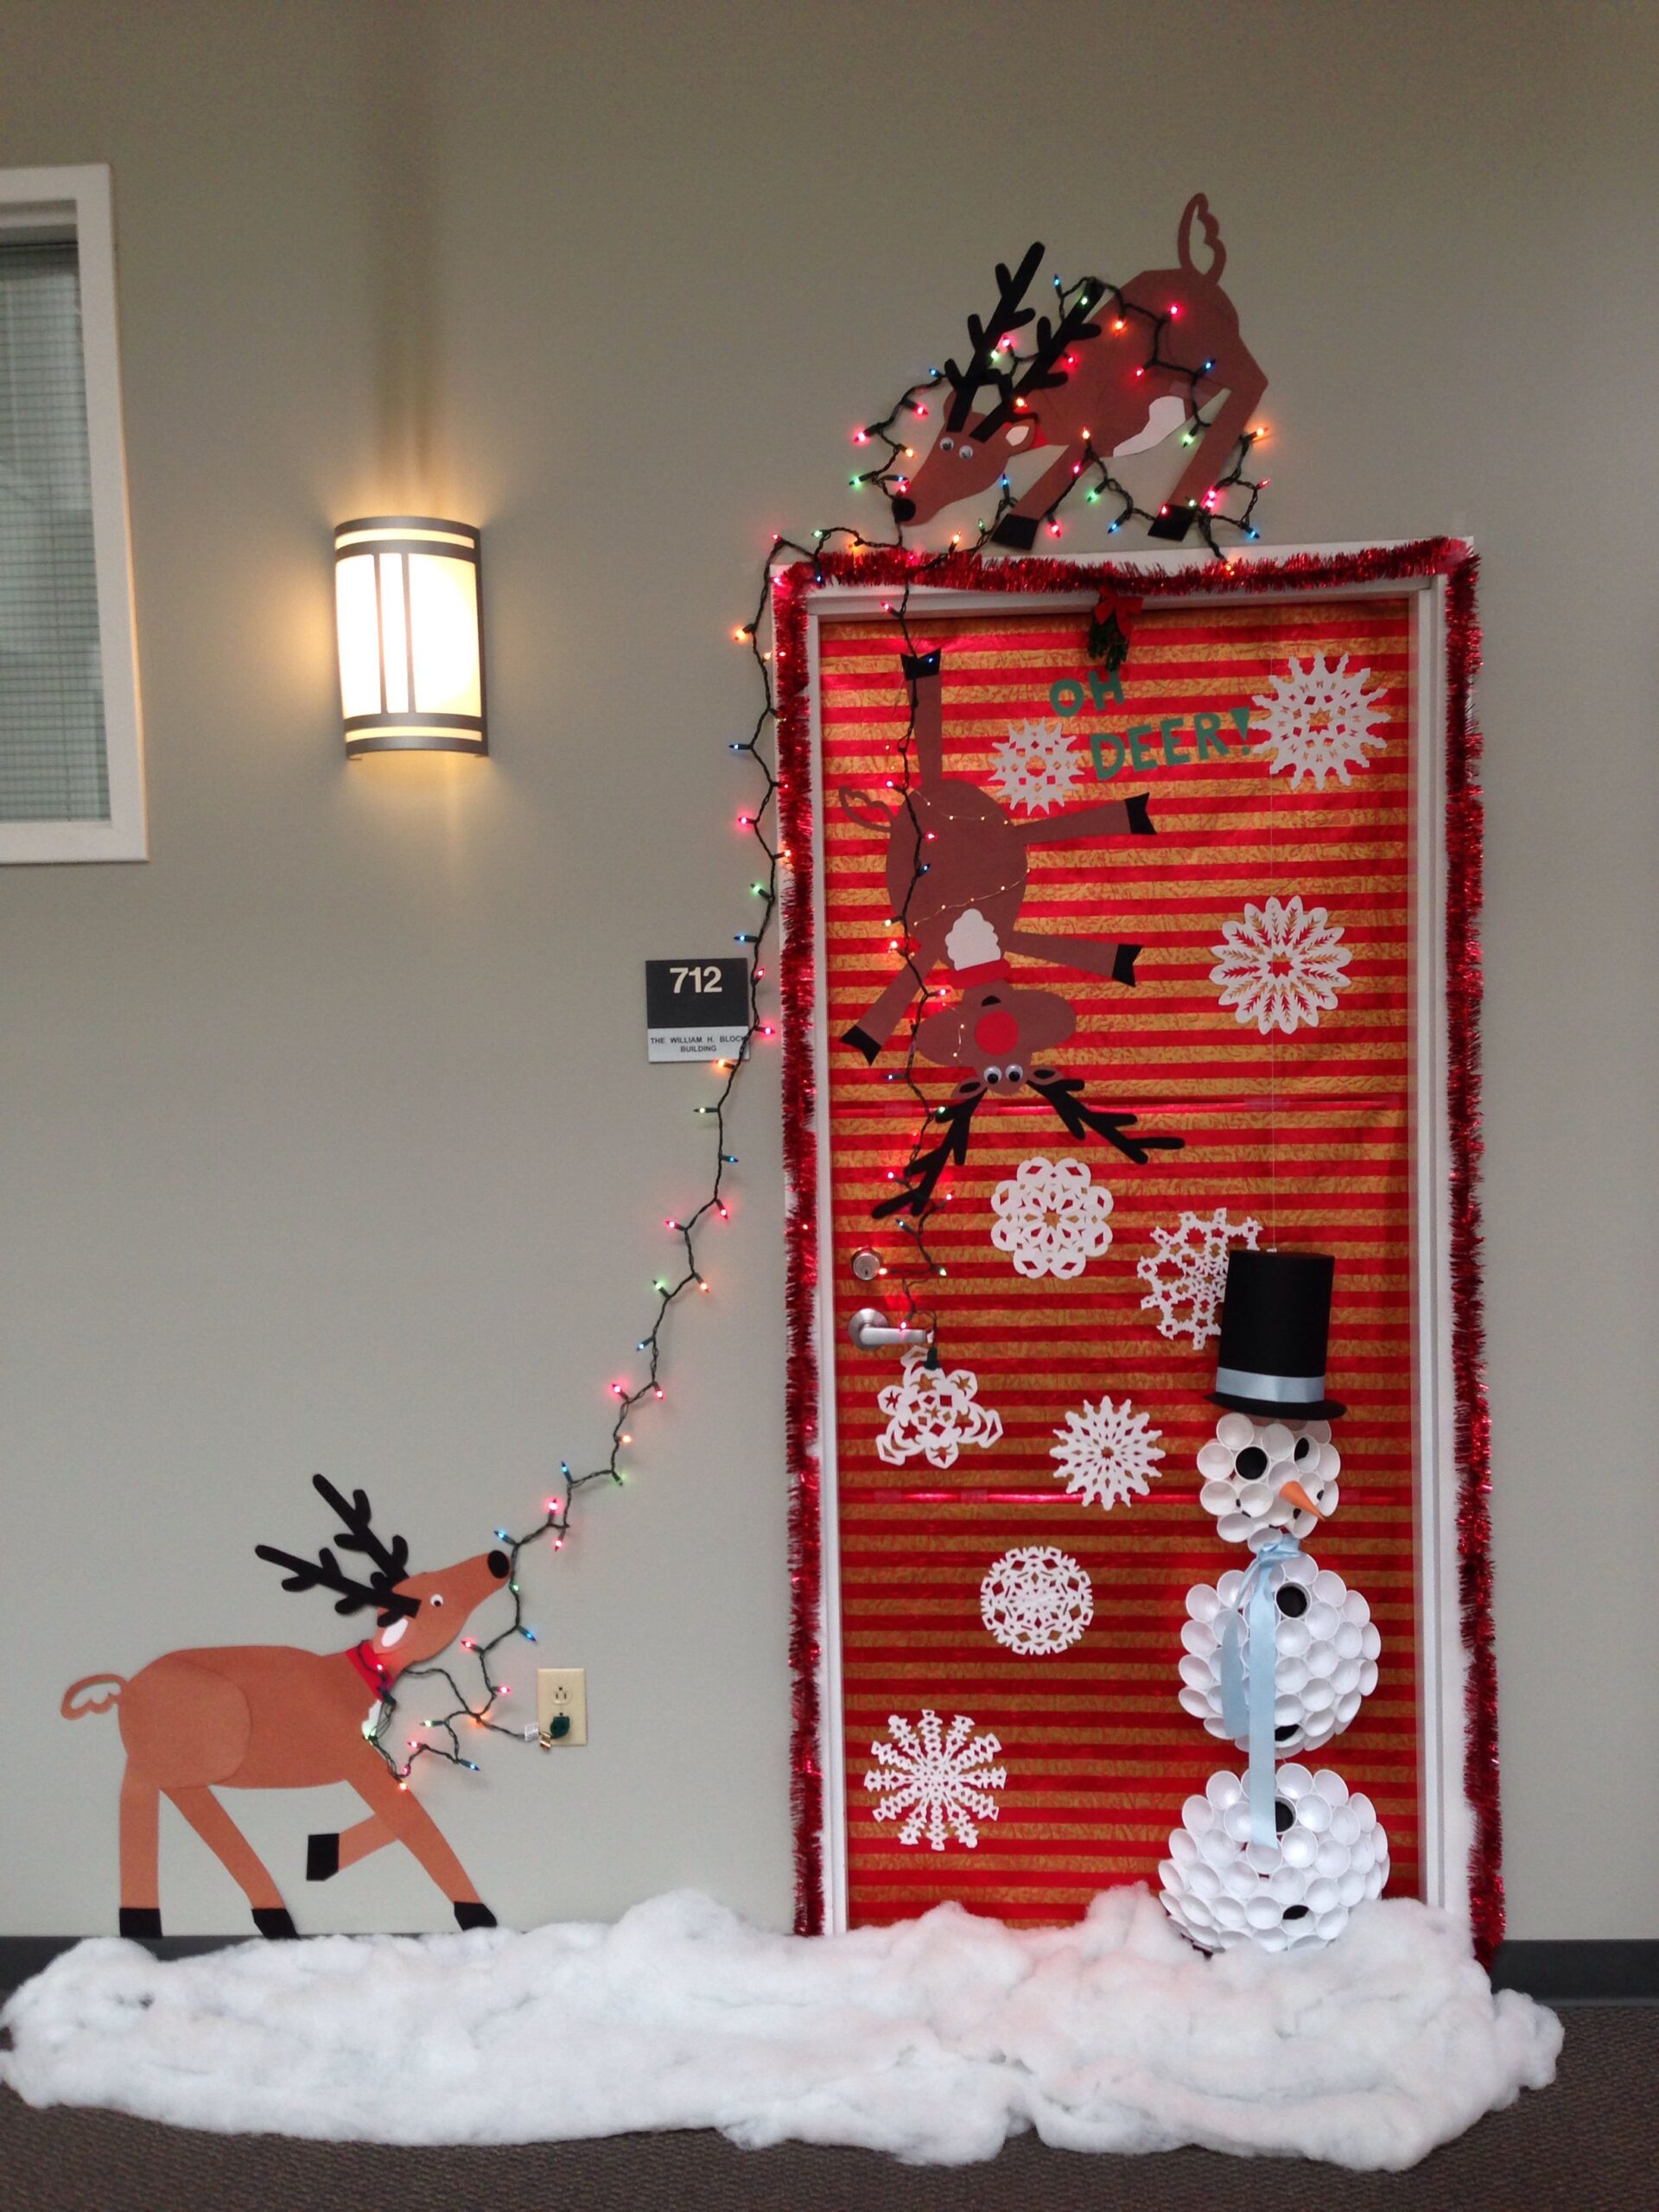 Our Christmas door decoration — FIRST PLACE__ Made